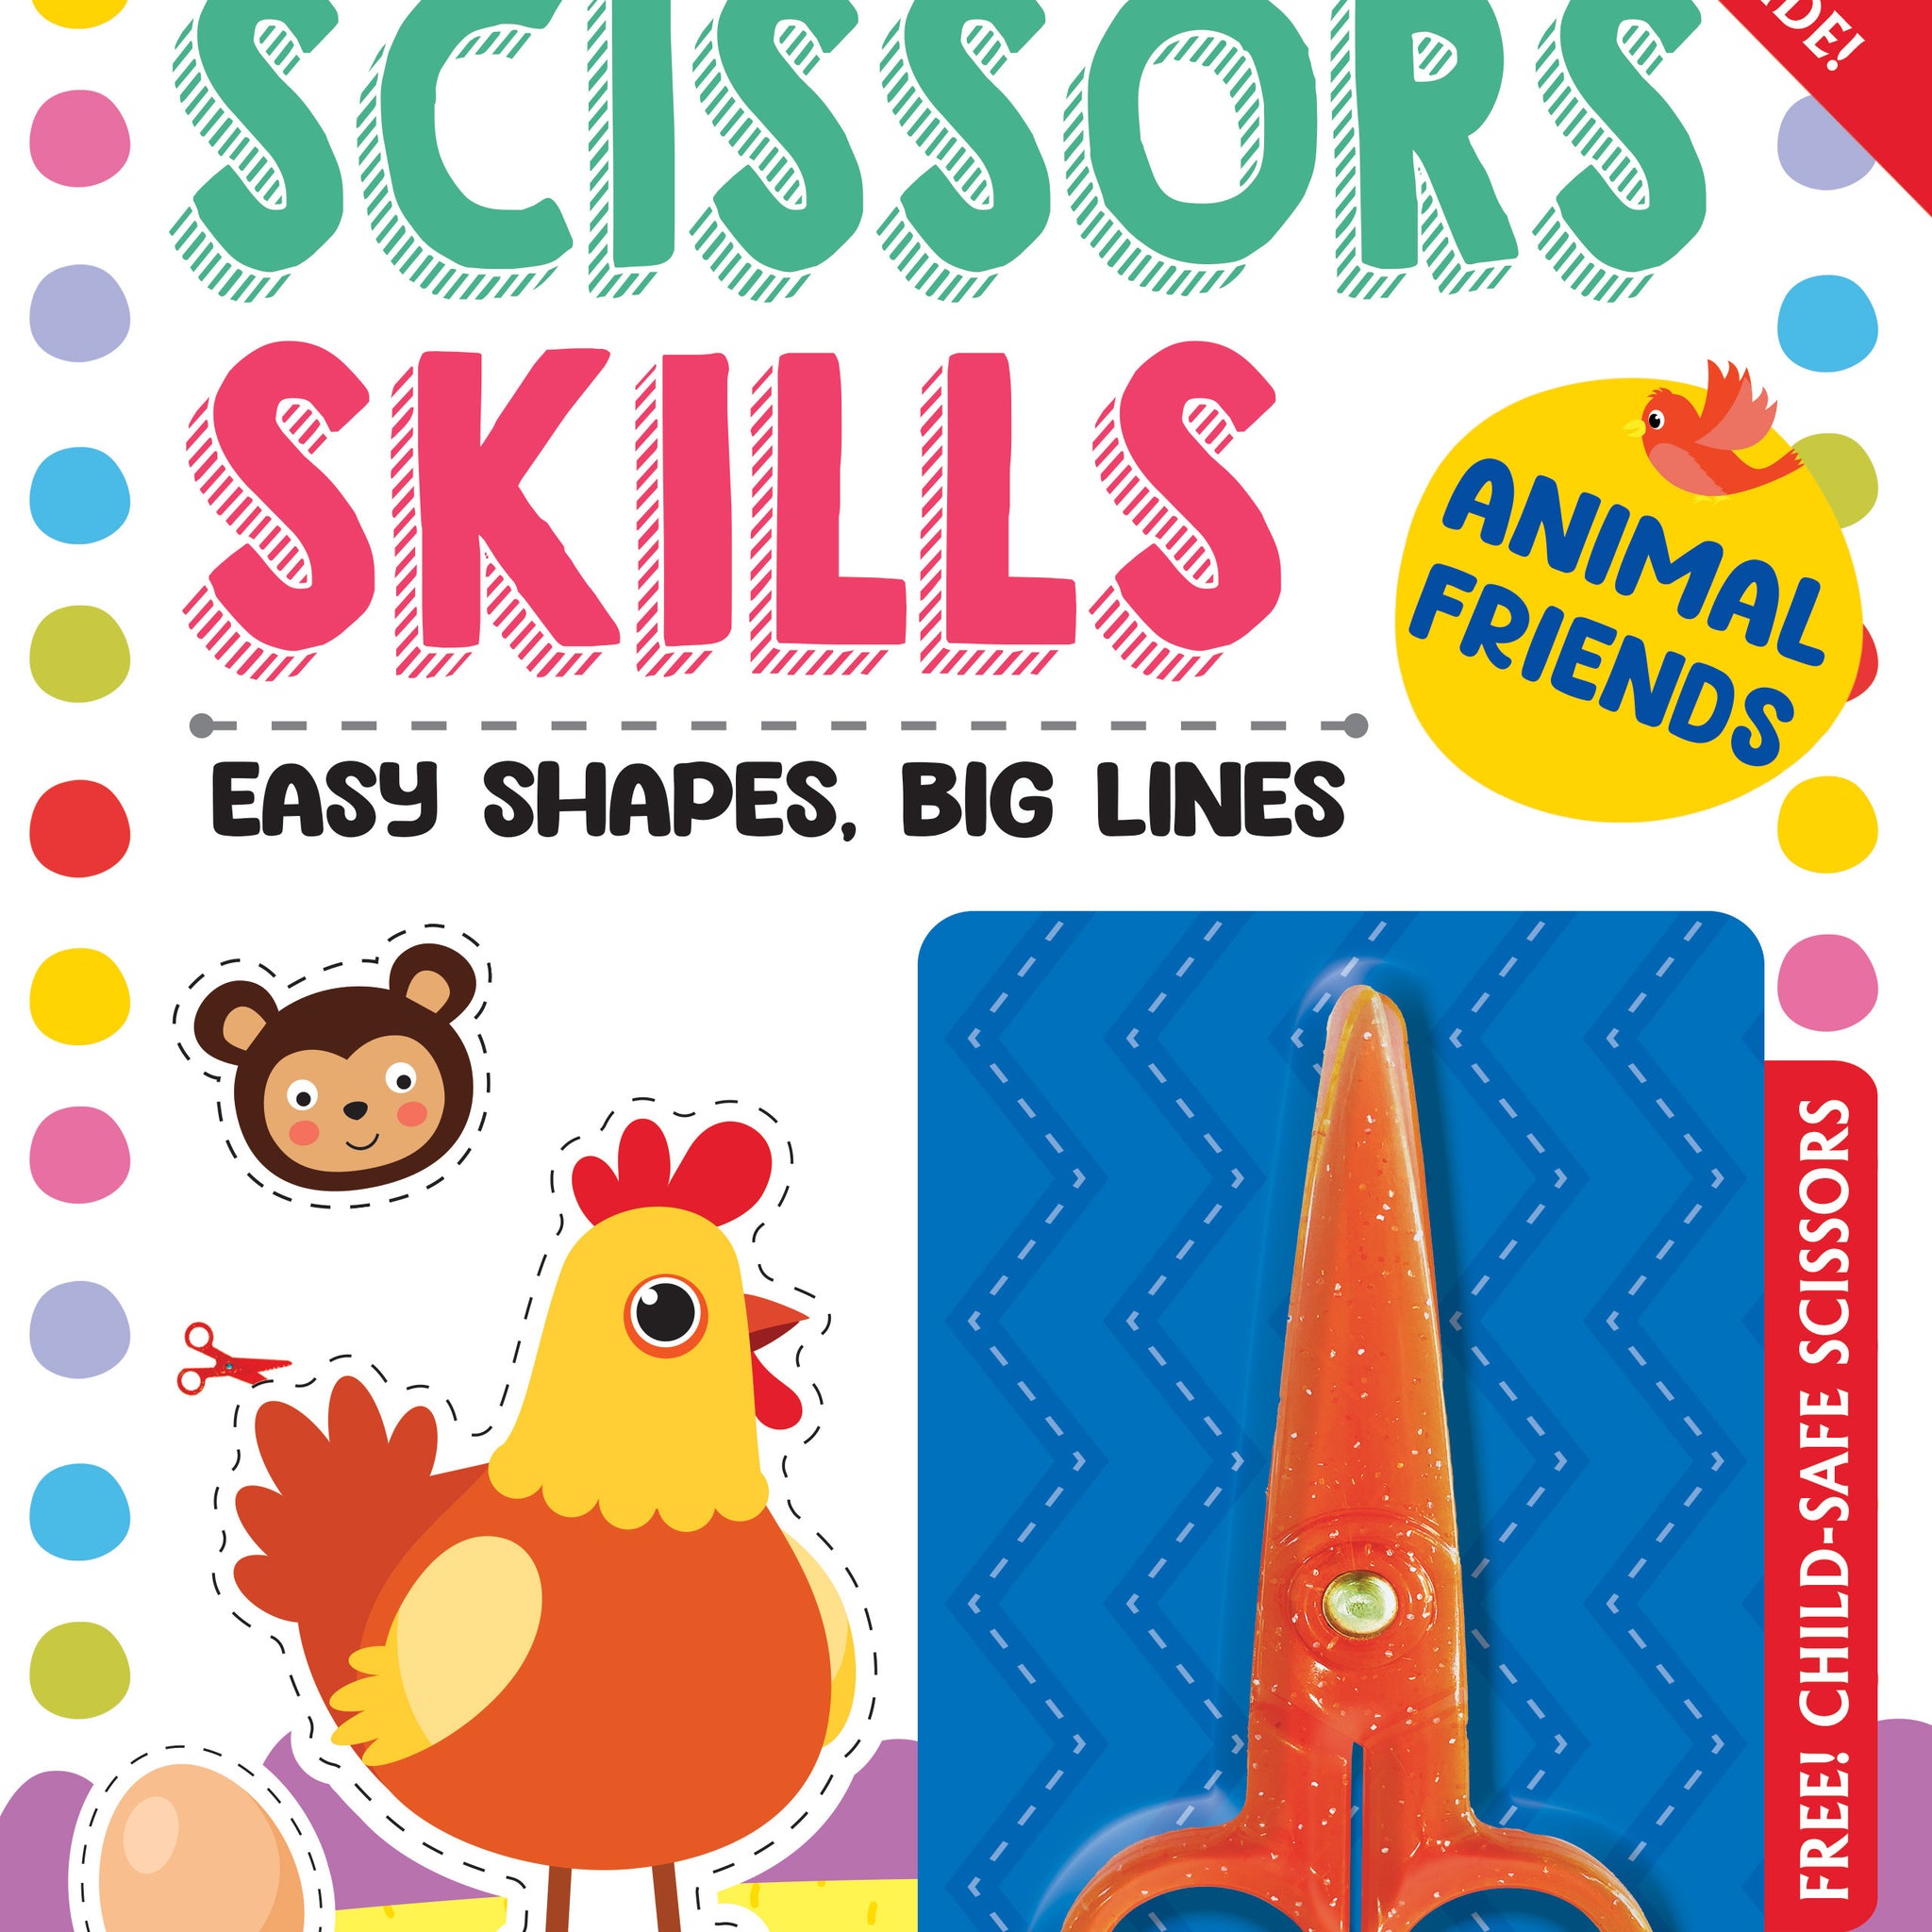 Animal Friends Scissors Skills Activity Book for Kids Age 4 - 7 years | With Child- Safe Scissors, Games and Mask